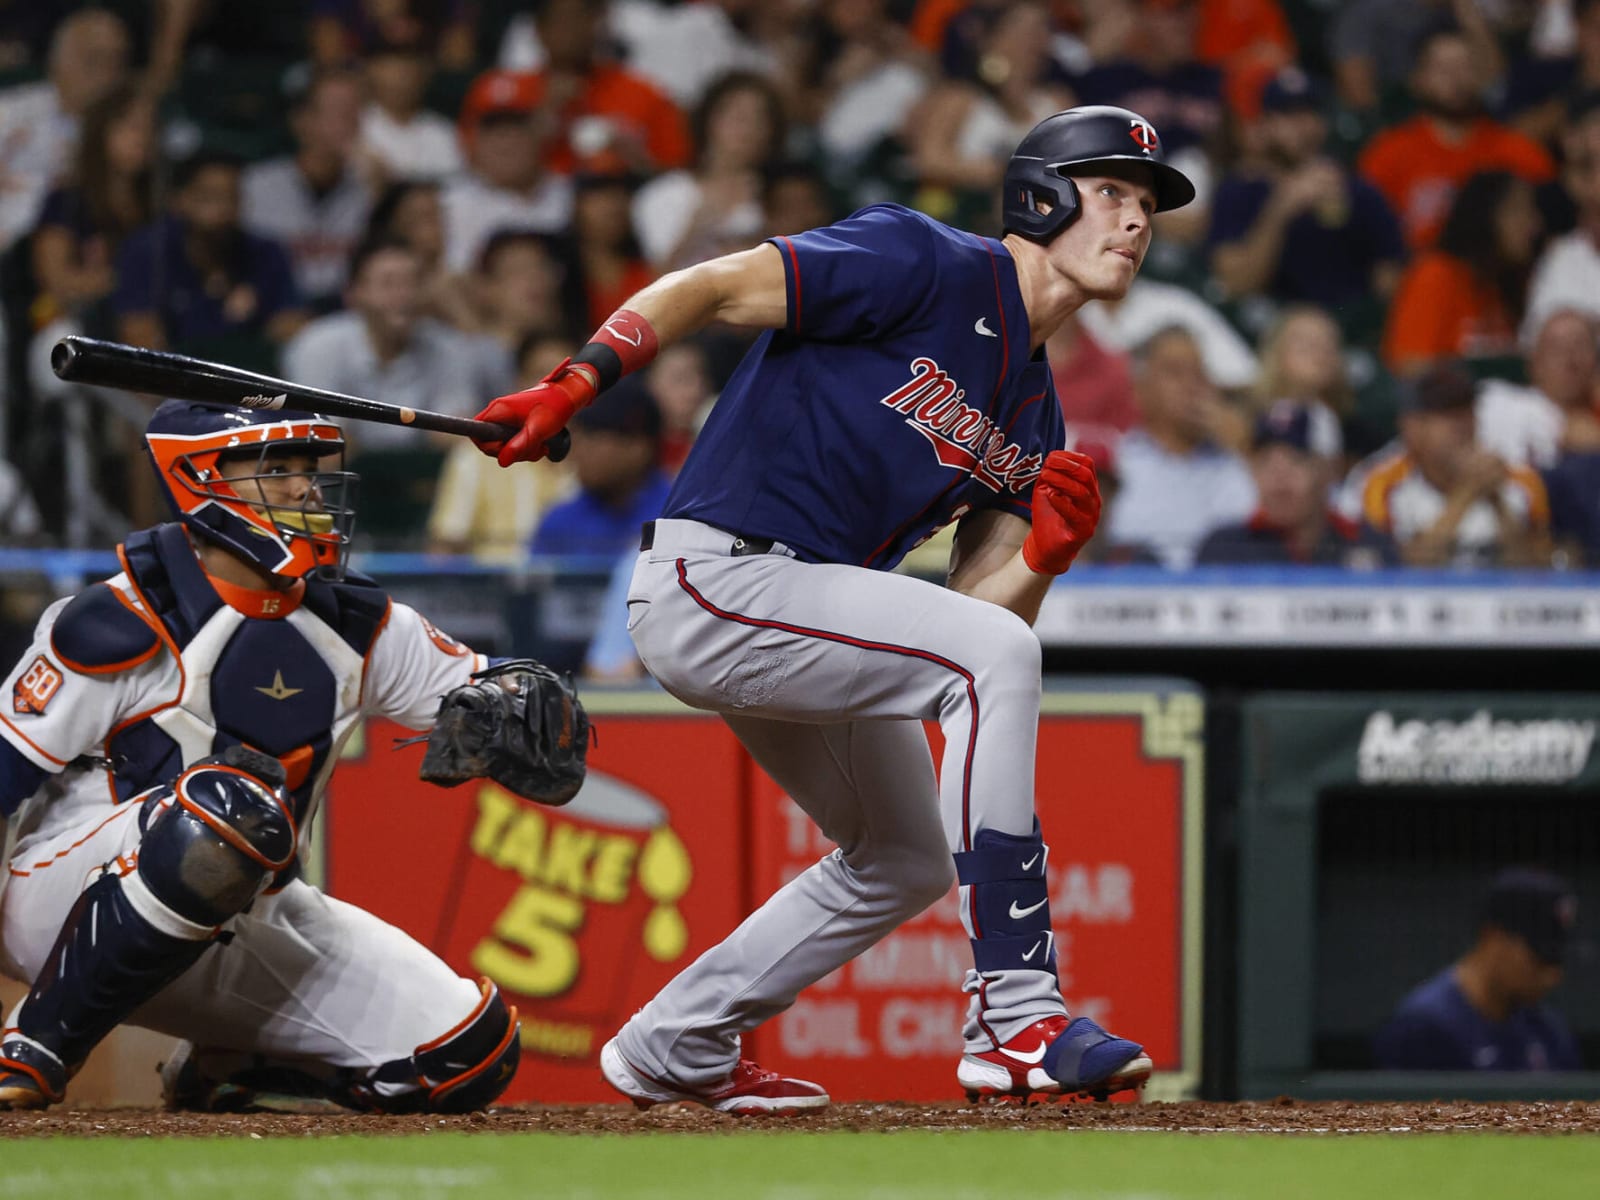 Twins place OF Max Kepler on IL amid flurry of roster moves